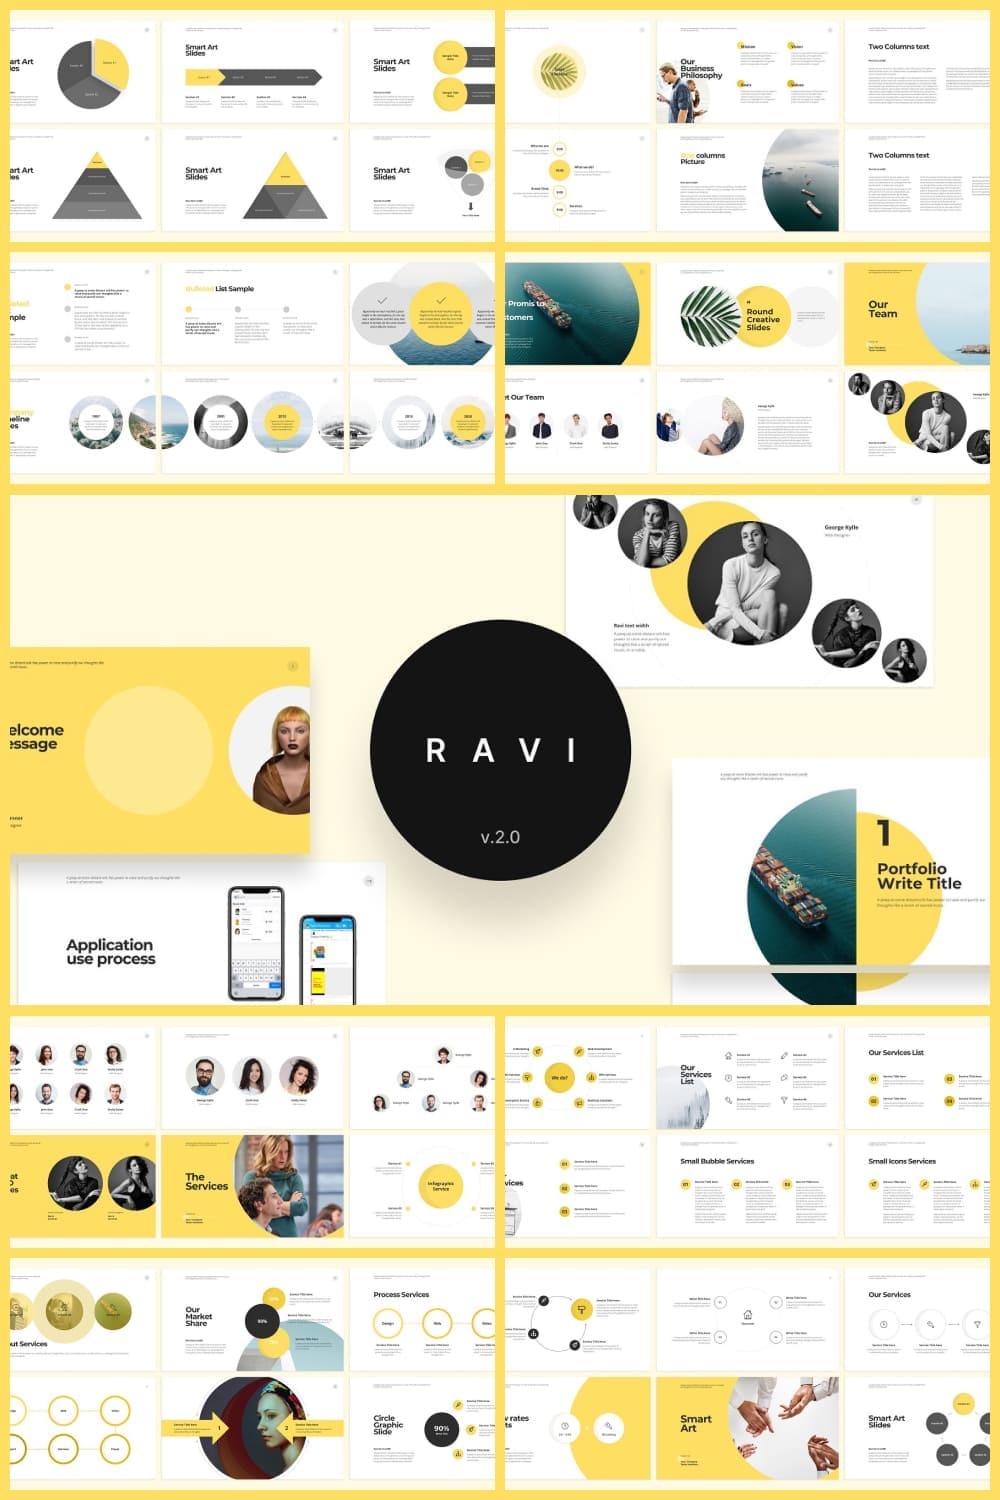 RAVI Powerpoint Template Collage image.